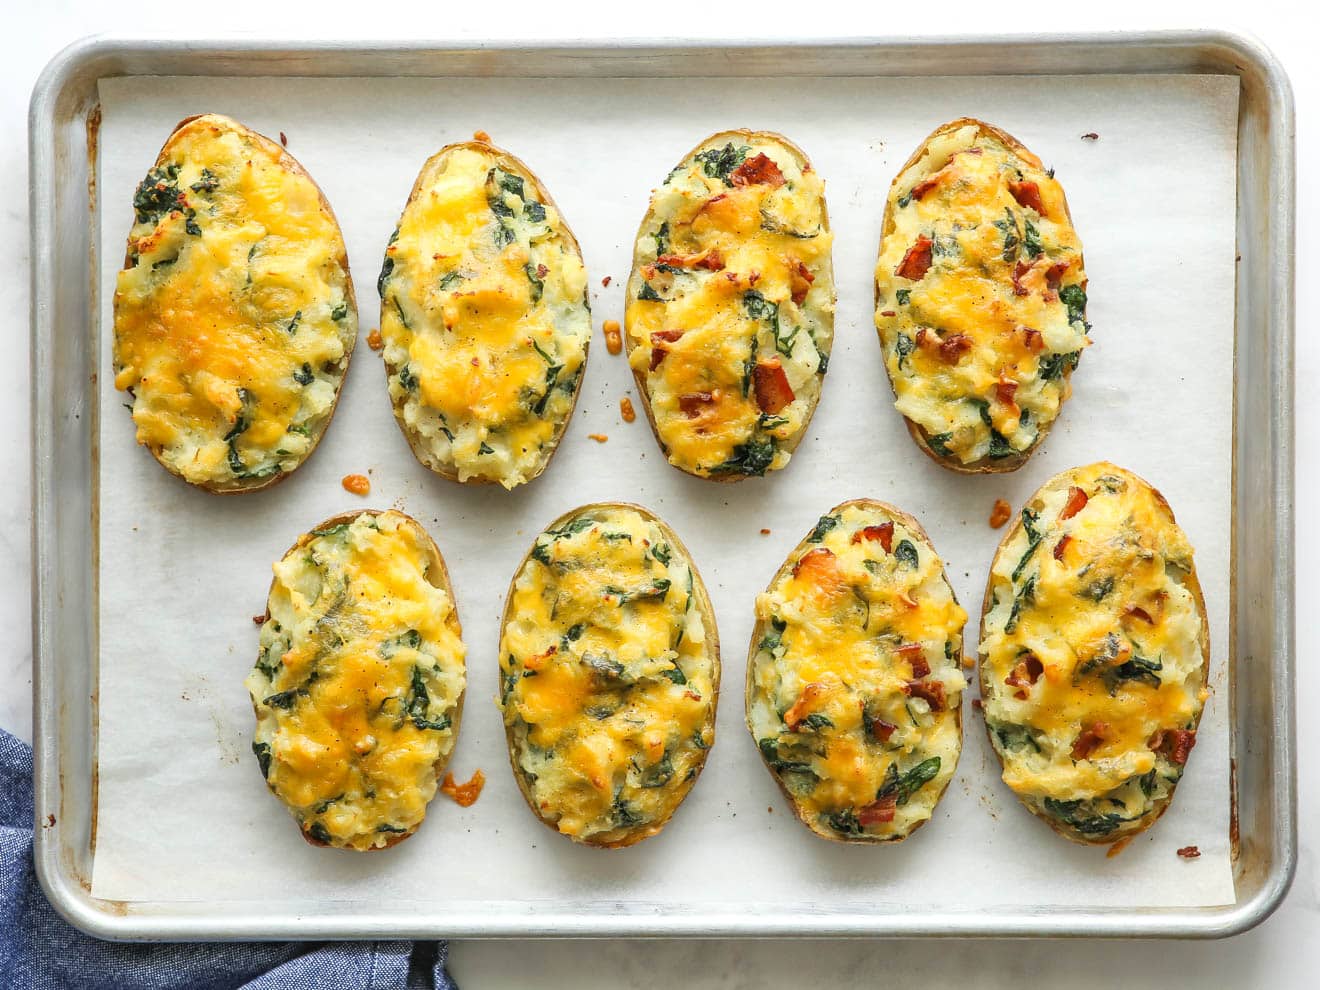 finished spinach and cheddar twice-baked potatoes on a sheet pan